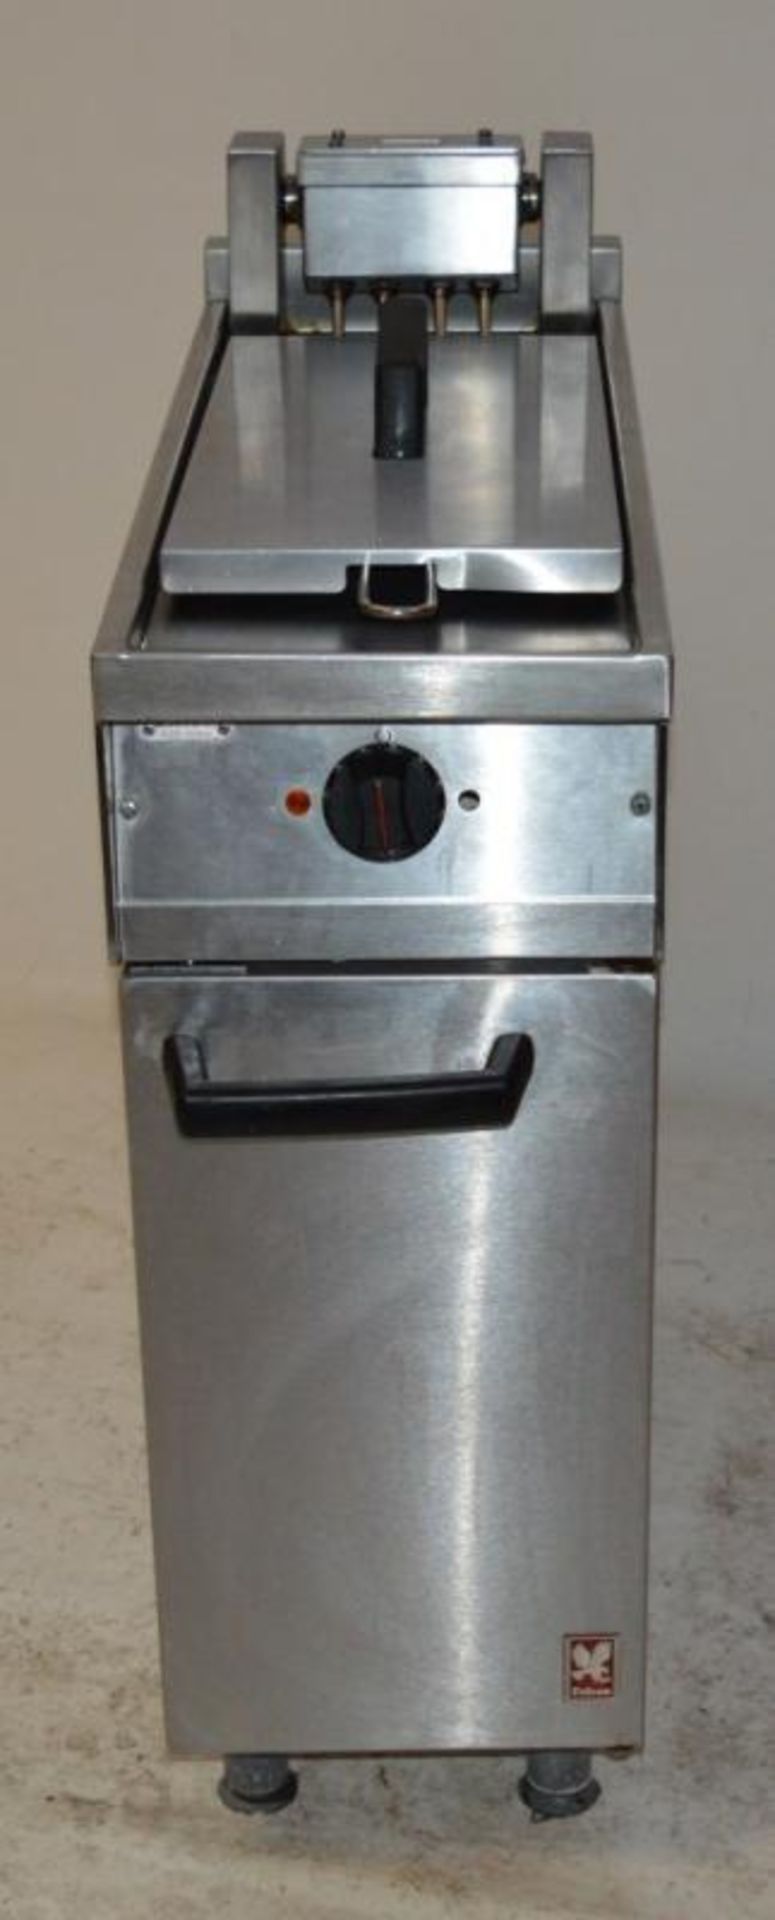 1 x Falcon Dominator E1830 Electric 3 Phase Fryer Cooker - Stainless Steel - H84 x W30 x D77 cms - C - Image 3 of 13